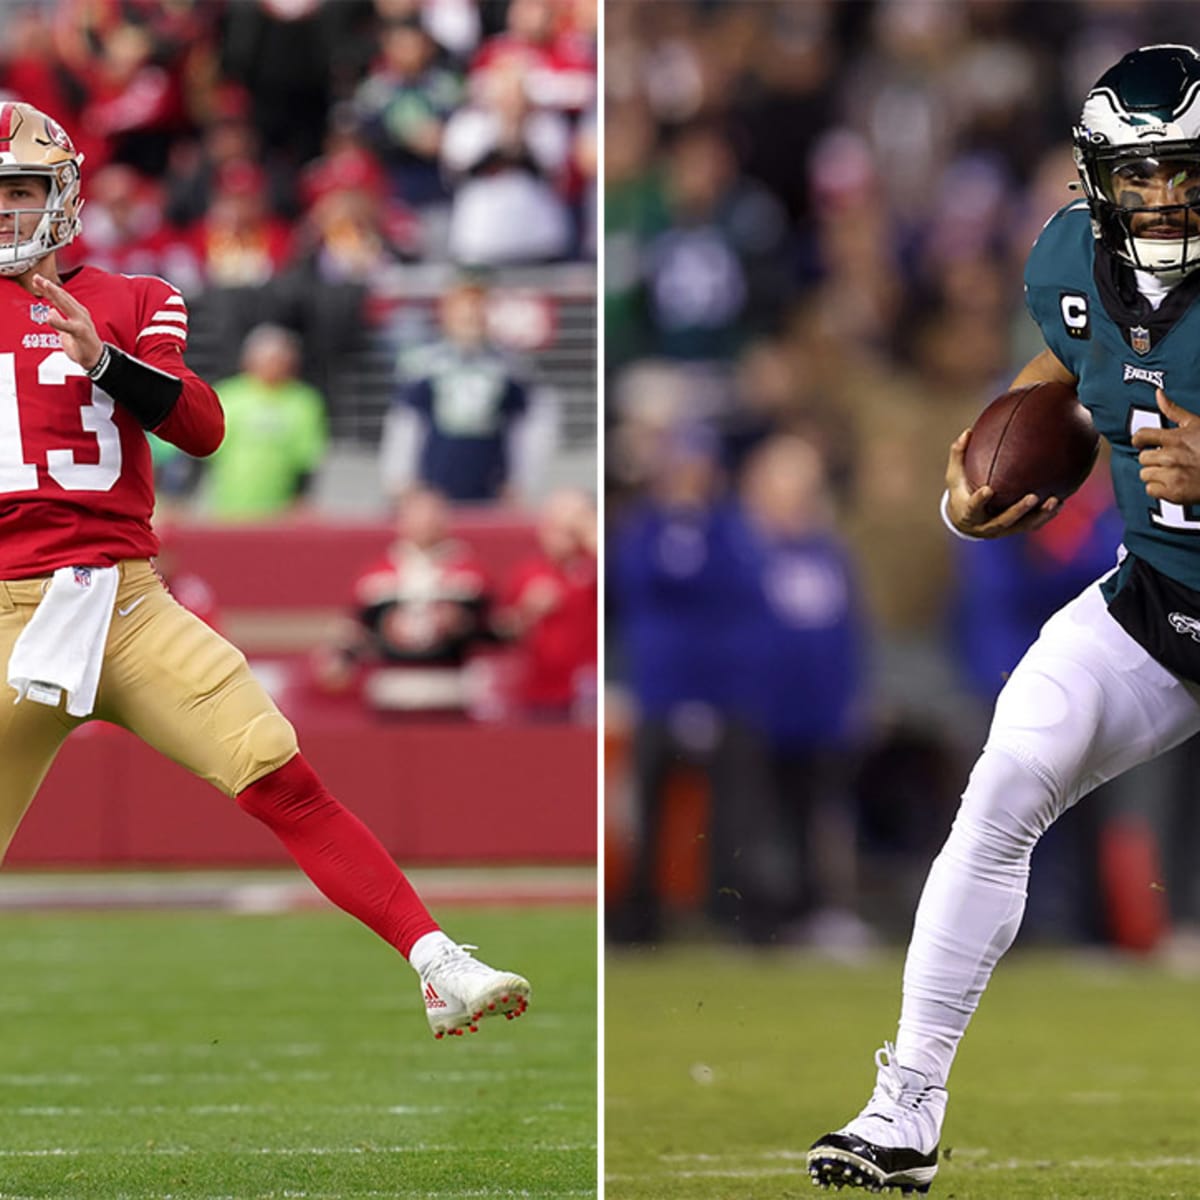 49ers vs. Eagles 4th quarter thread: A painful, painful ending